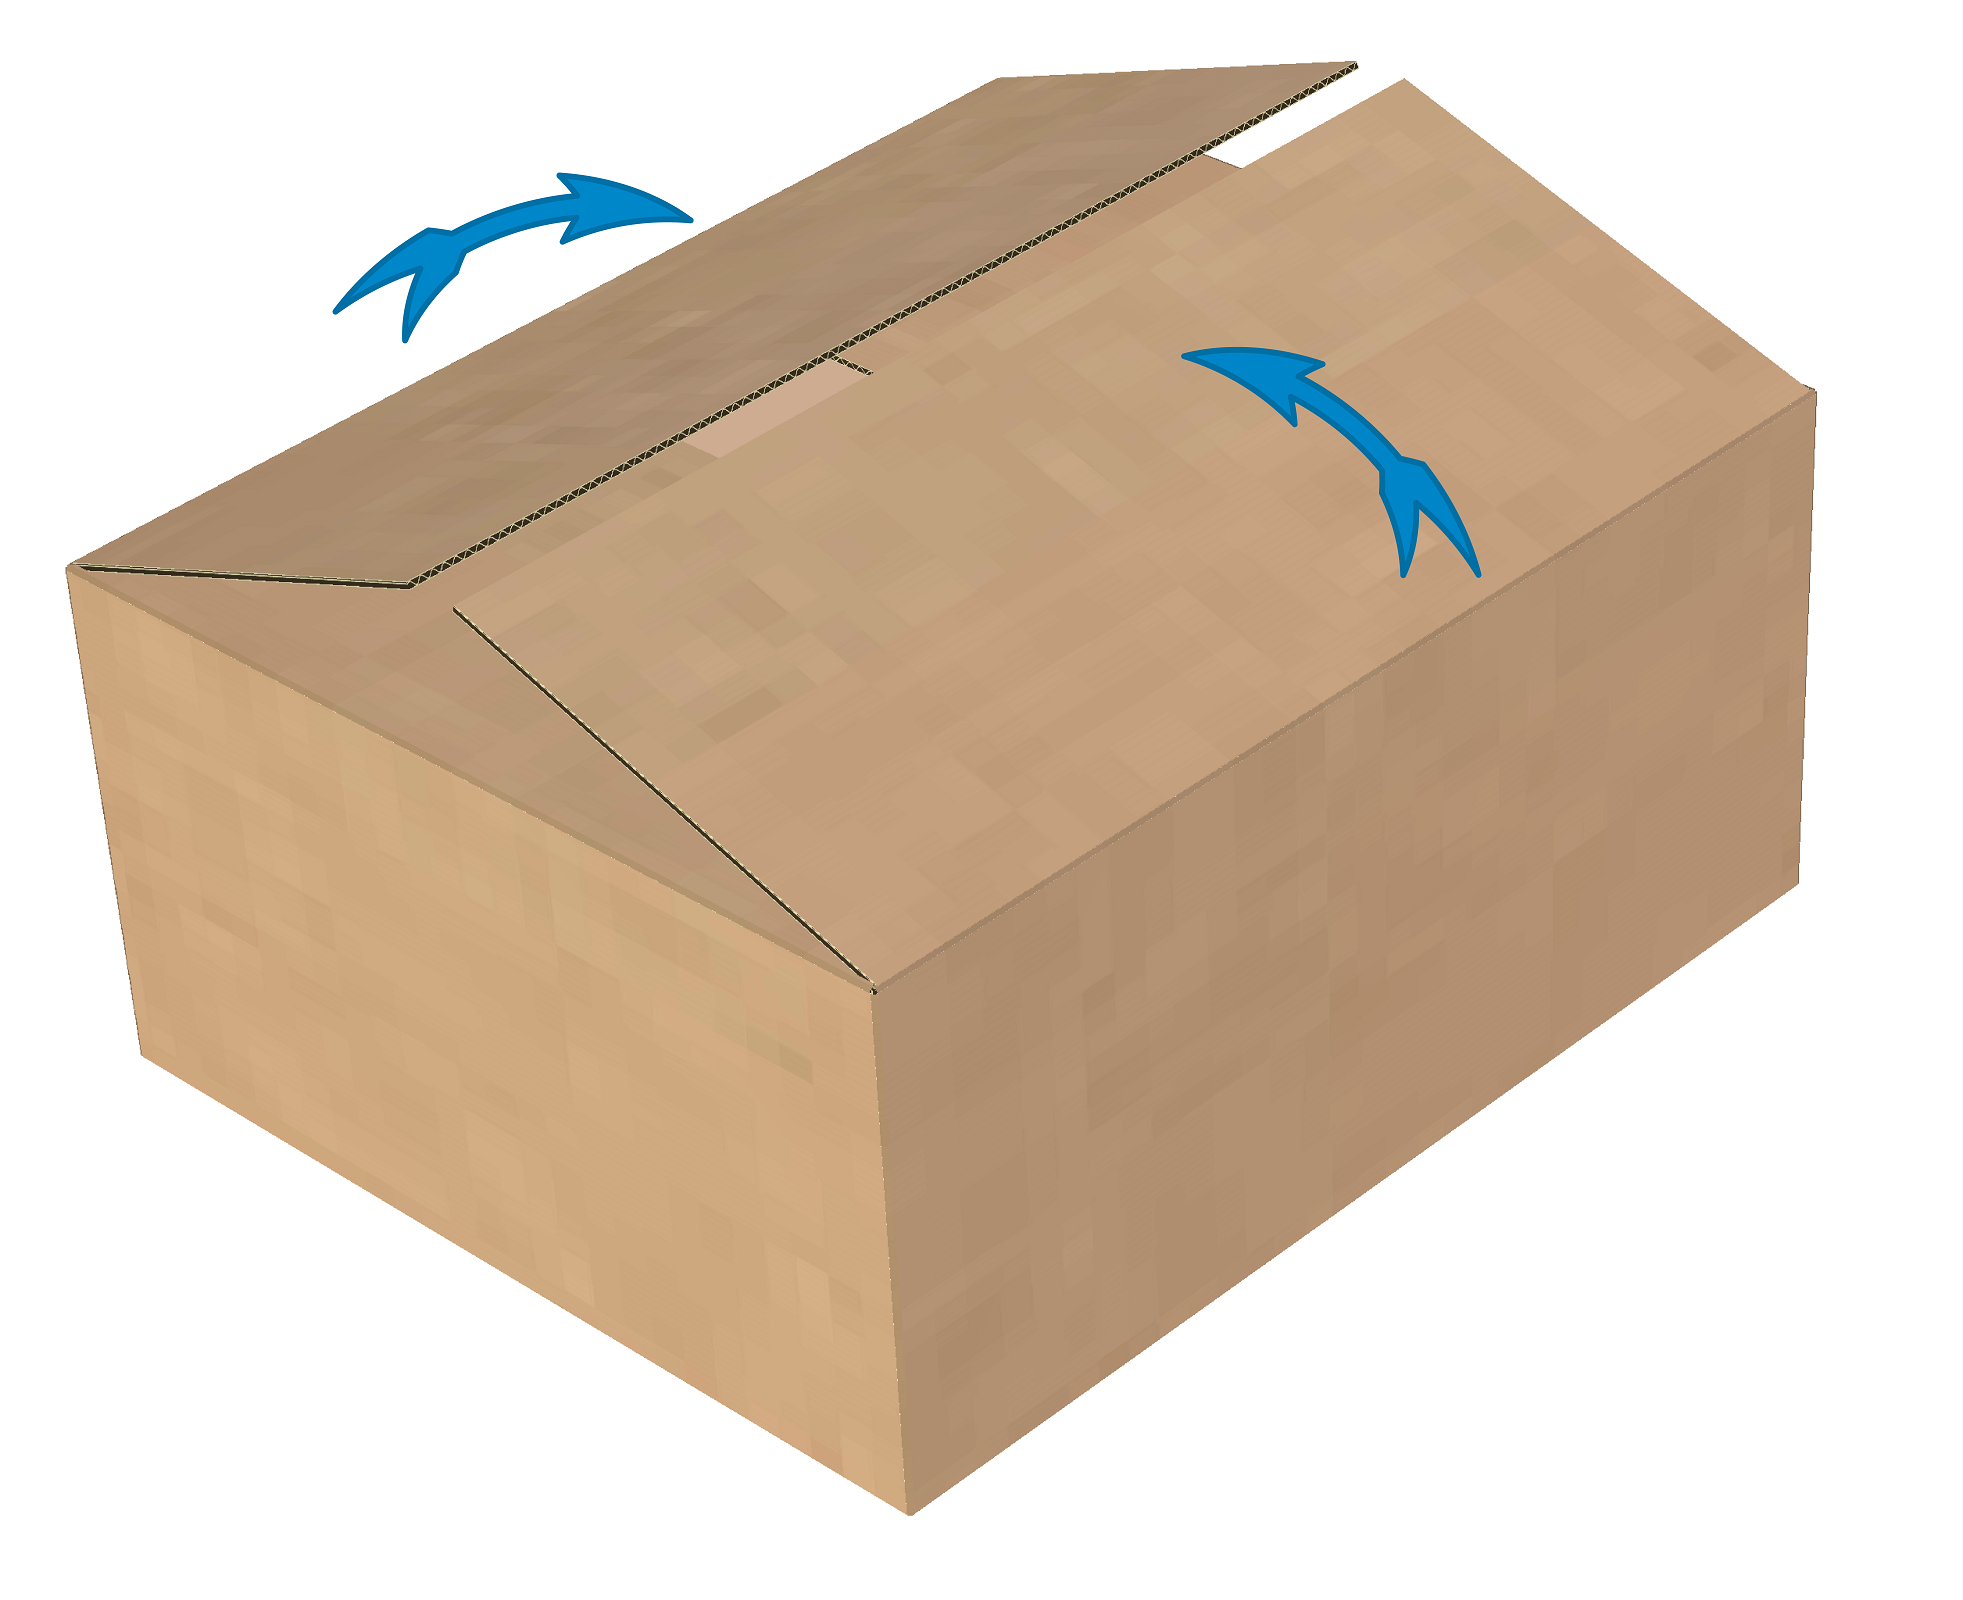 Follow the arrows and fold the long panels to close the half-slot cardboard container.